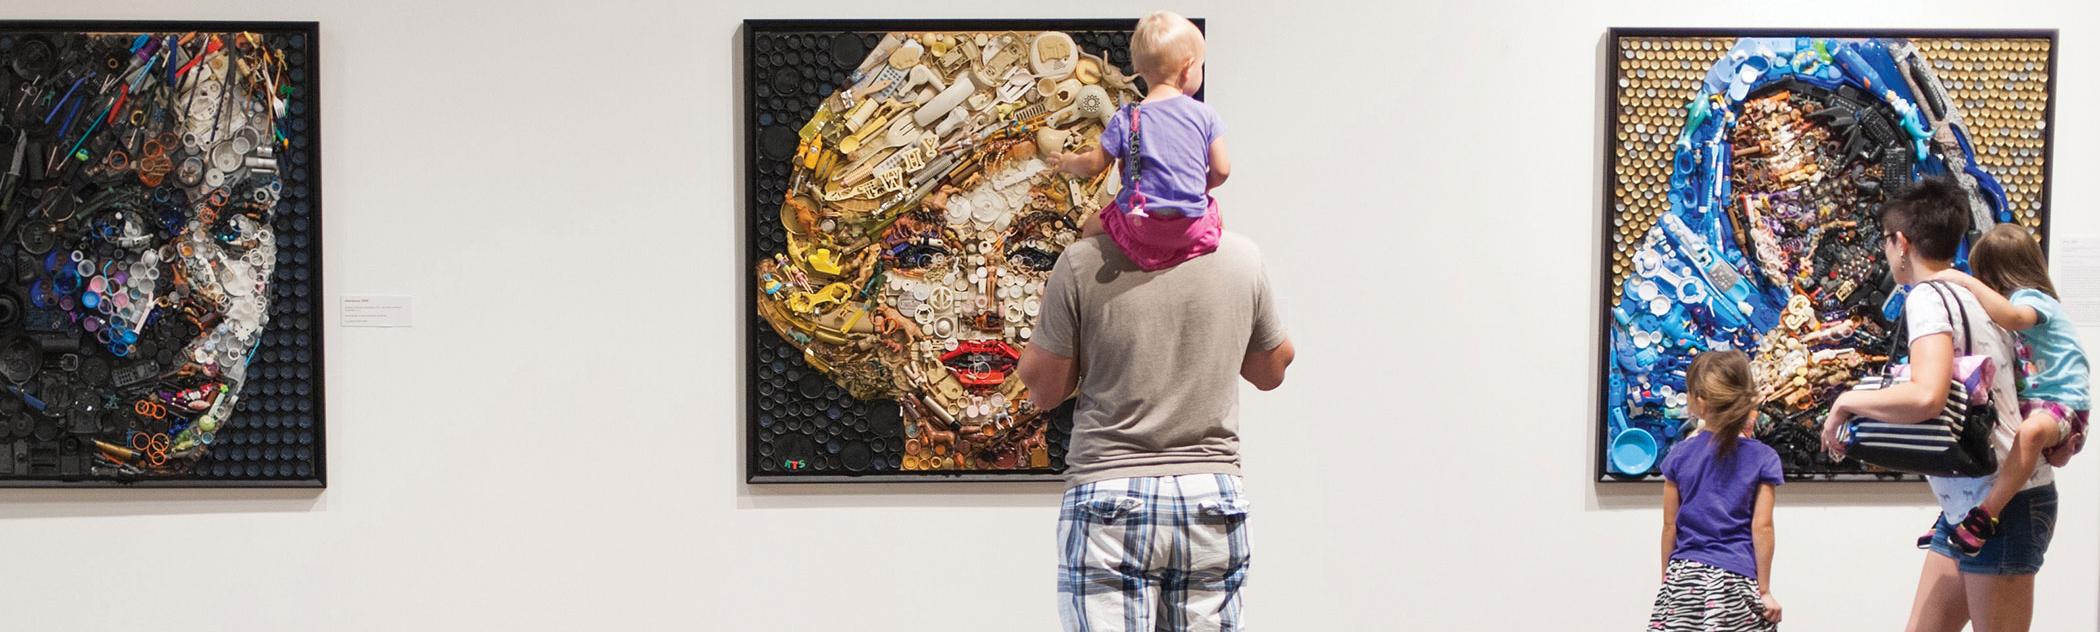 Family looks at 3 pieces of art displayed on a wall, including a portrait of Marilyn Monroe